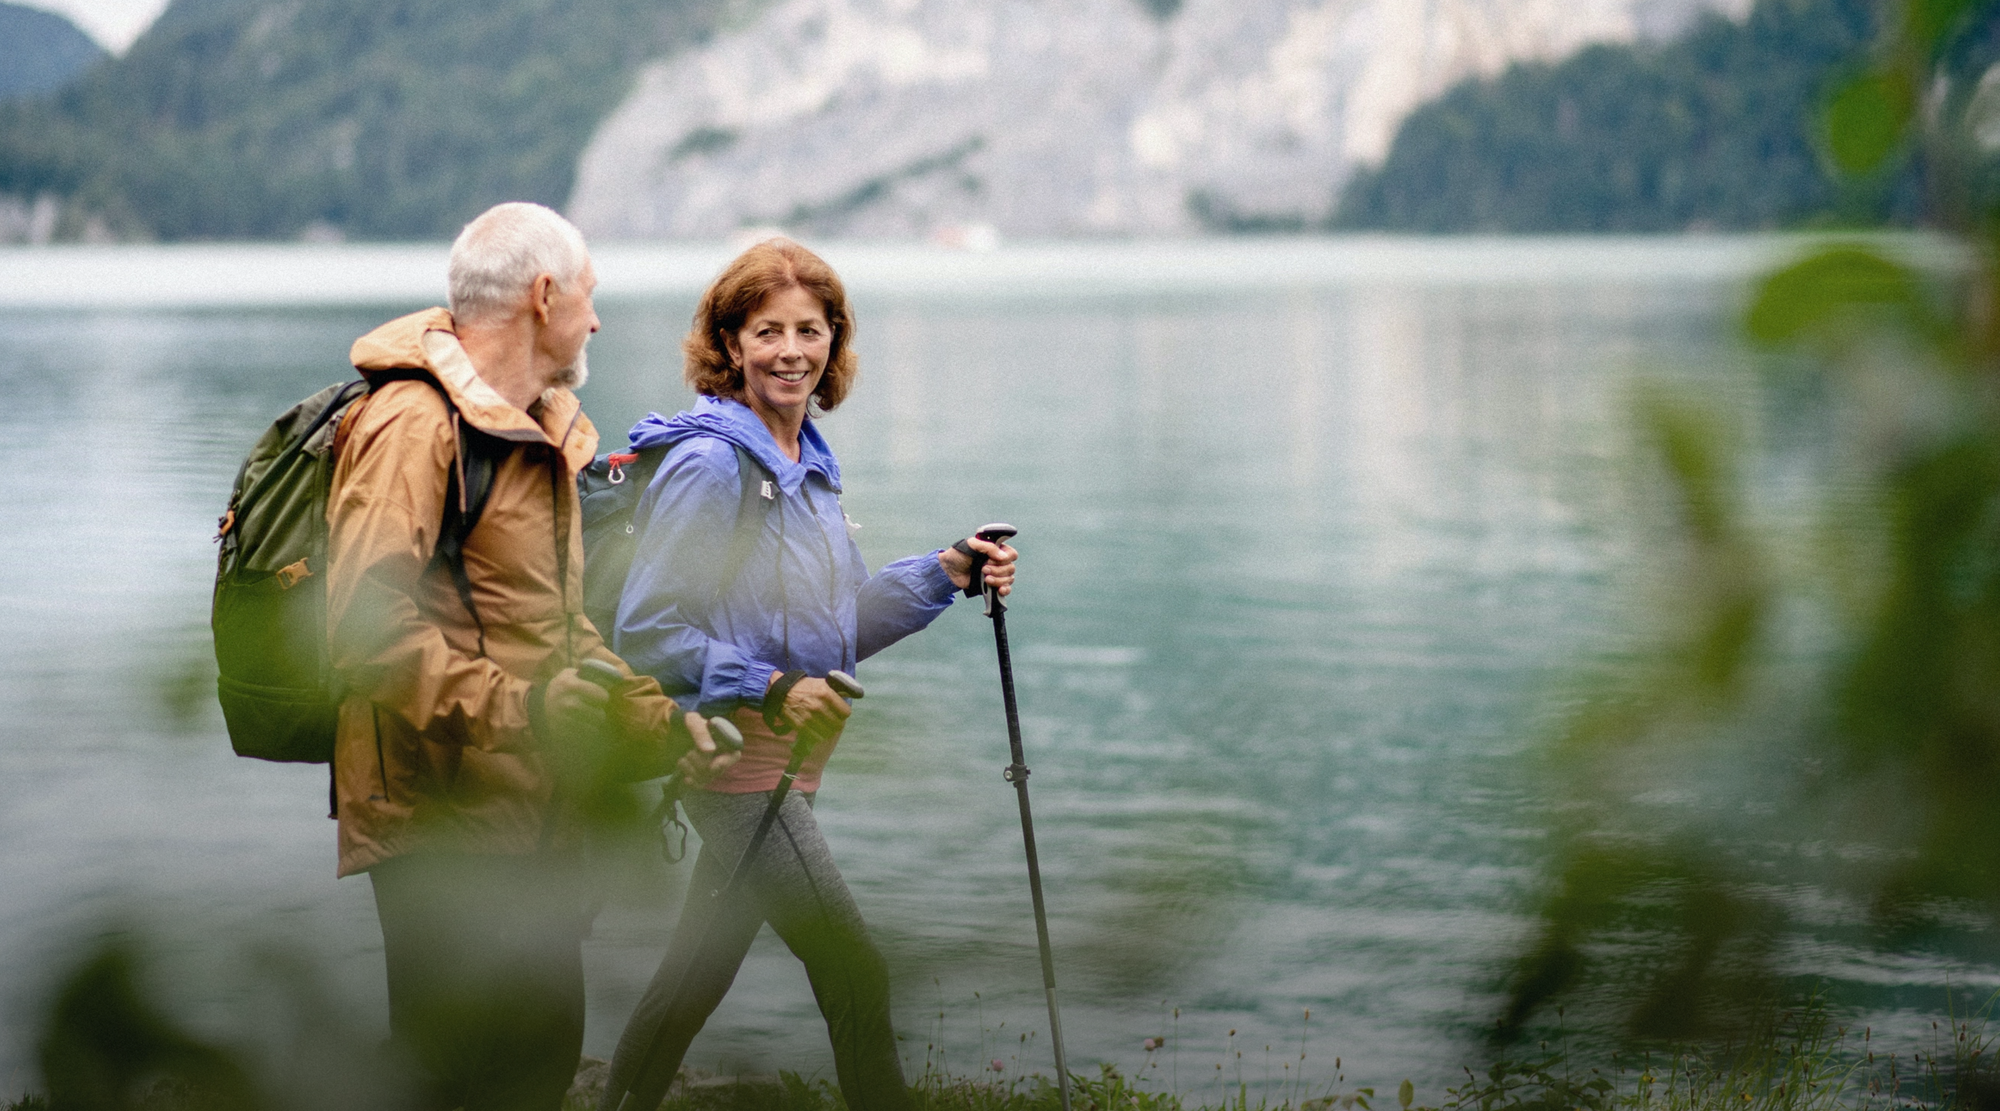 A middle aged man and woman hiking with walking sticks